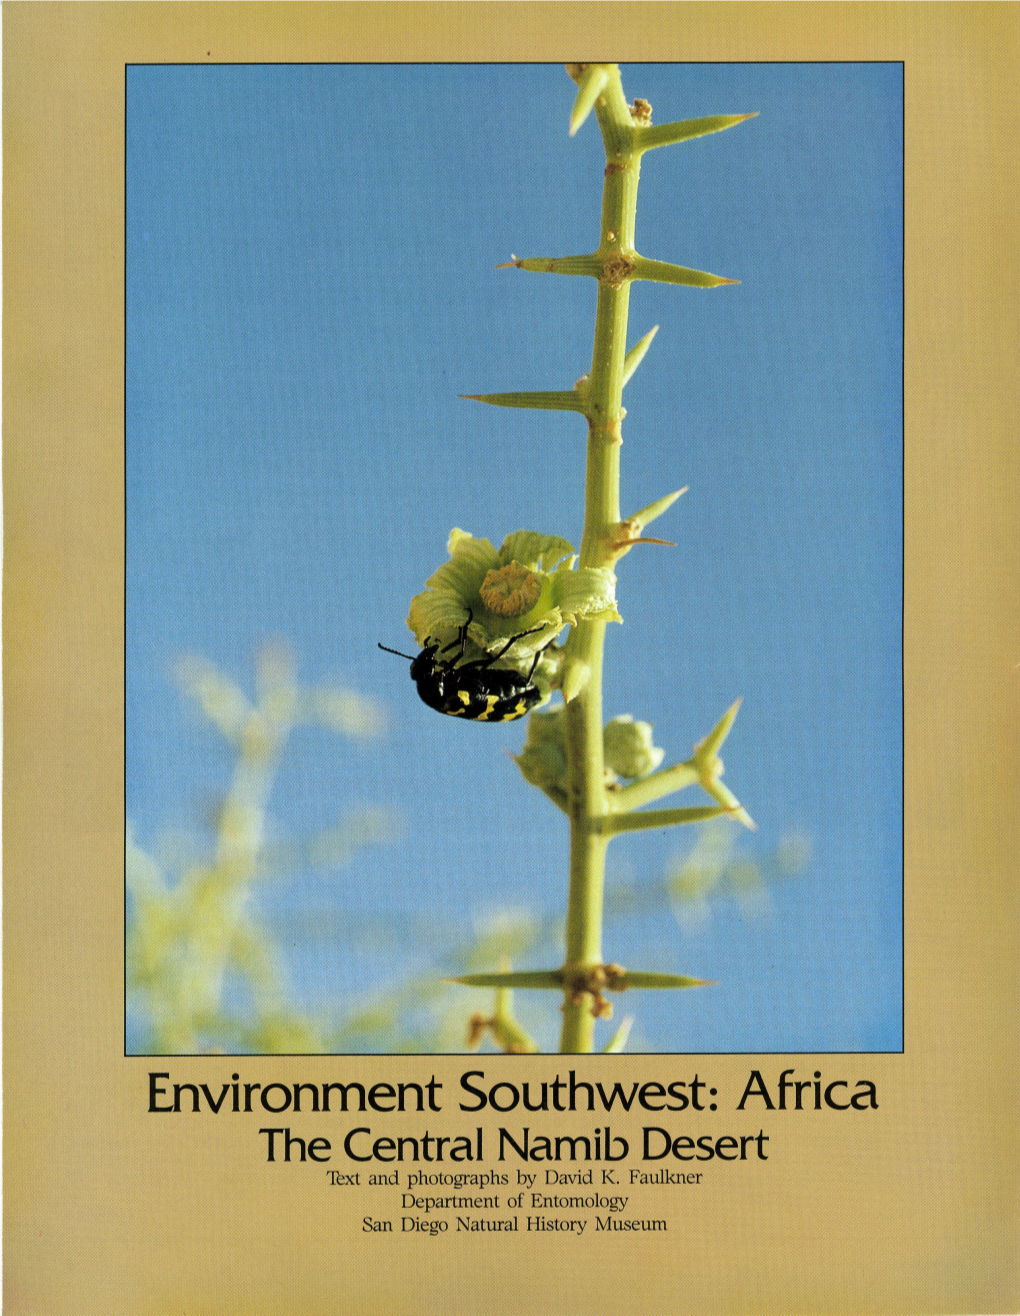 Environment Southwest: Africa the Central Namib Desert 'Iext and Photographs by David K